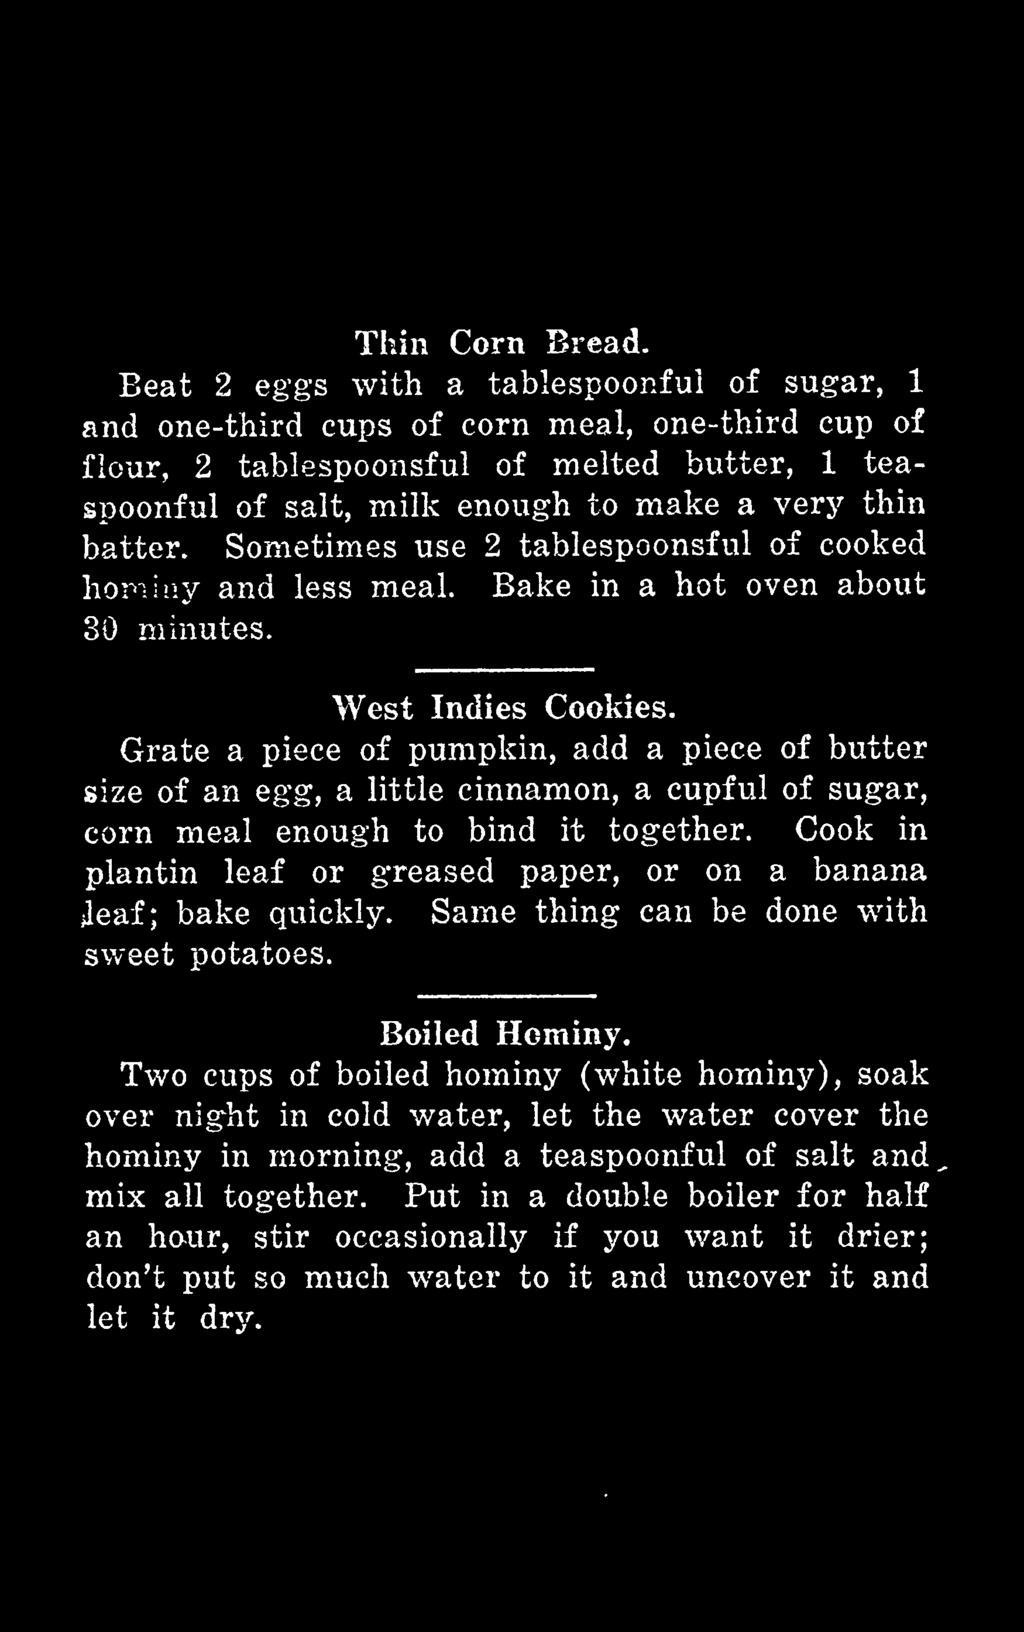 Sometimes use 2 tablespoonsful of cooked hominy and less meal. Bake in a hot oven about SO minutes. West Indies Cookies.